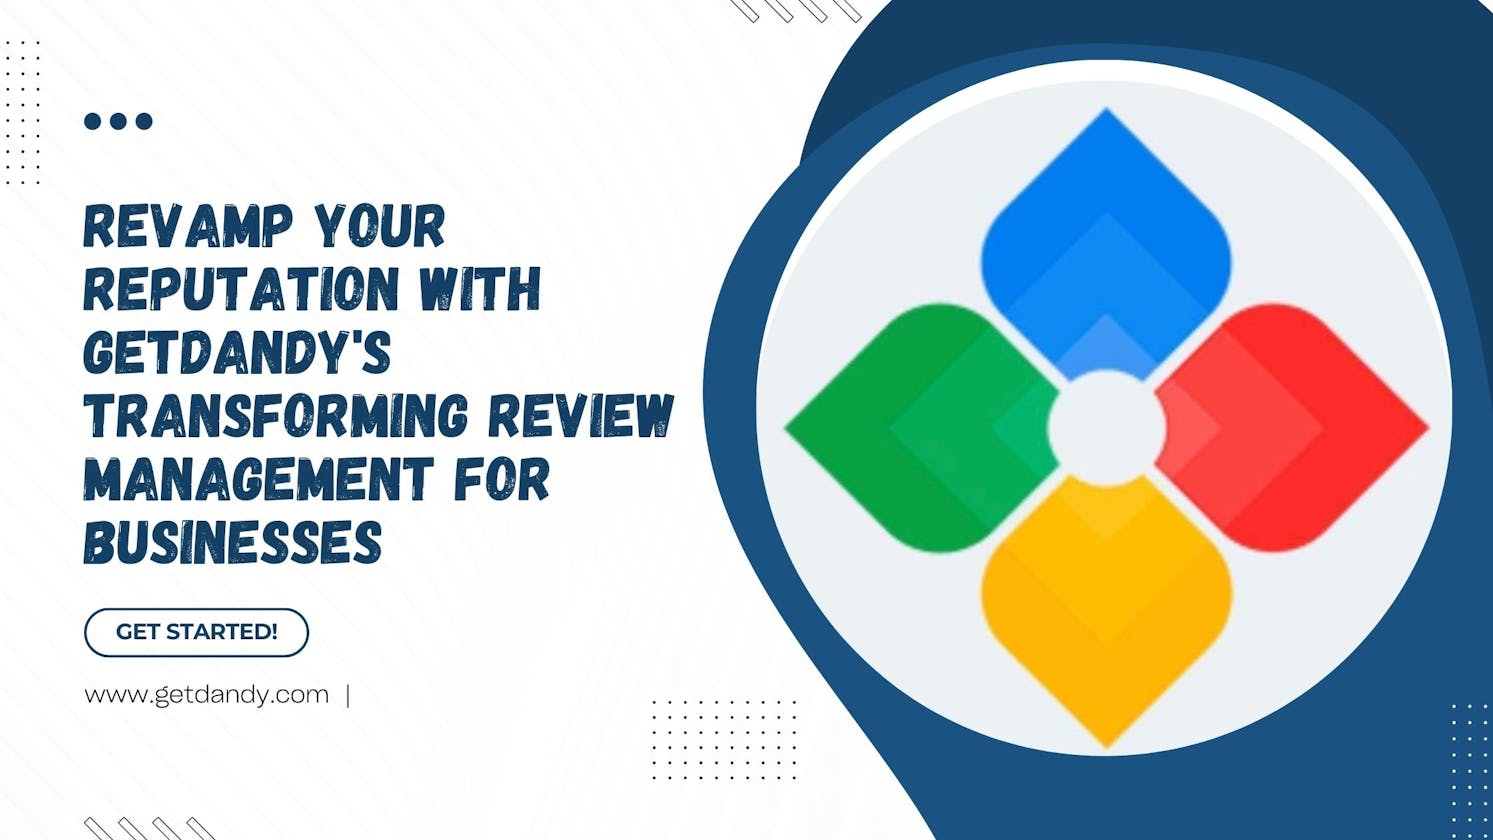 Revamp Your Reputation with Getdandy's Transforming Review Management for Businesses